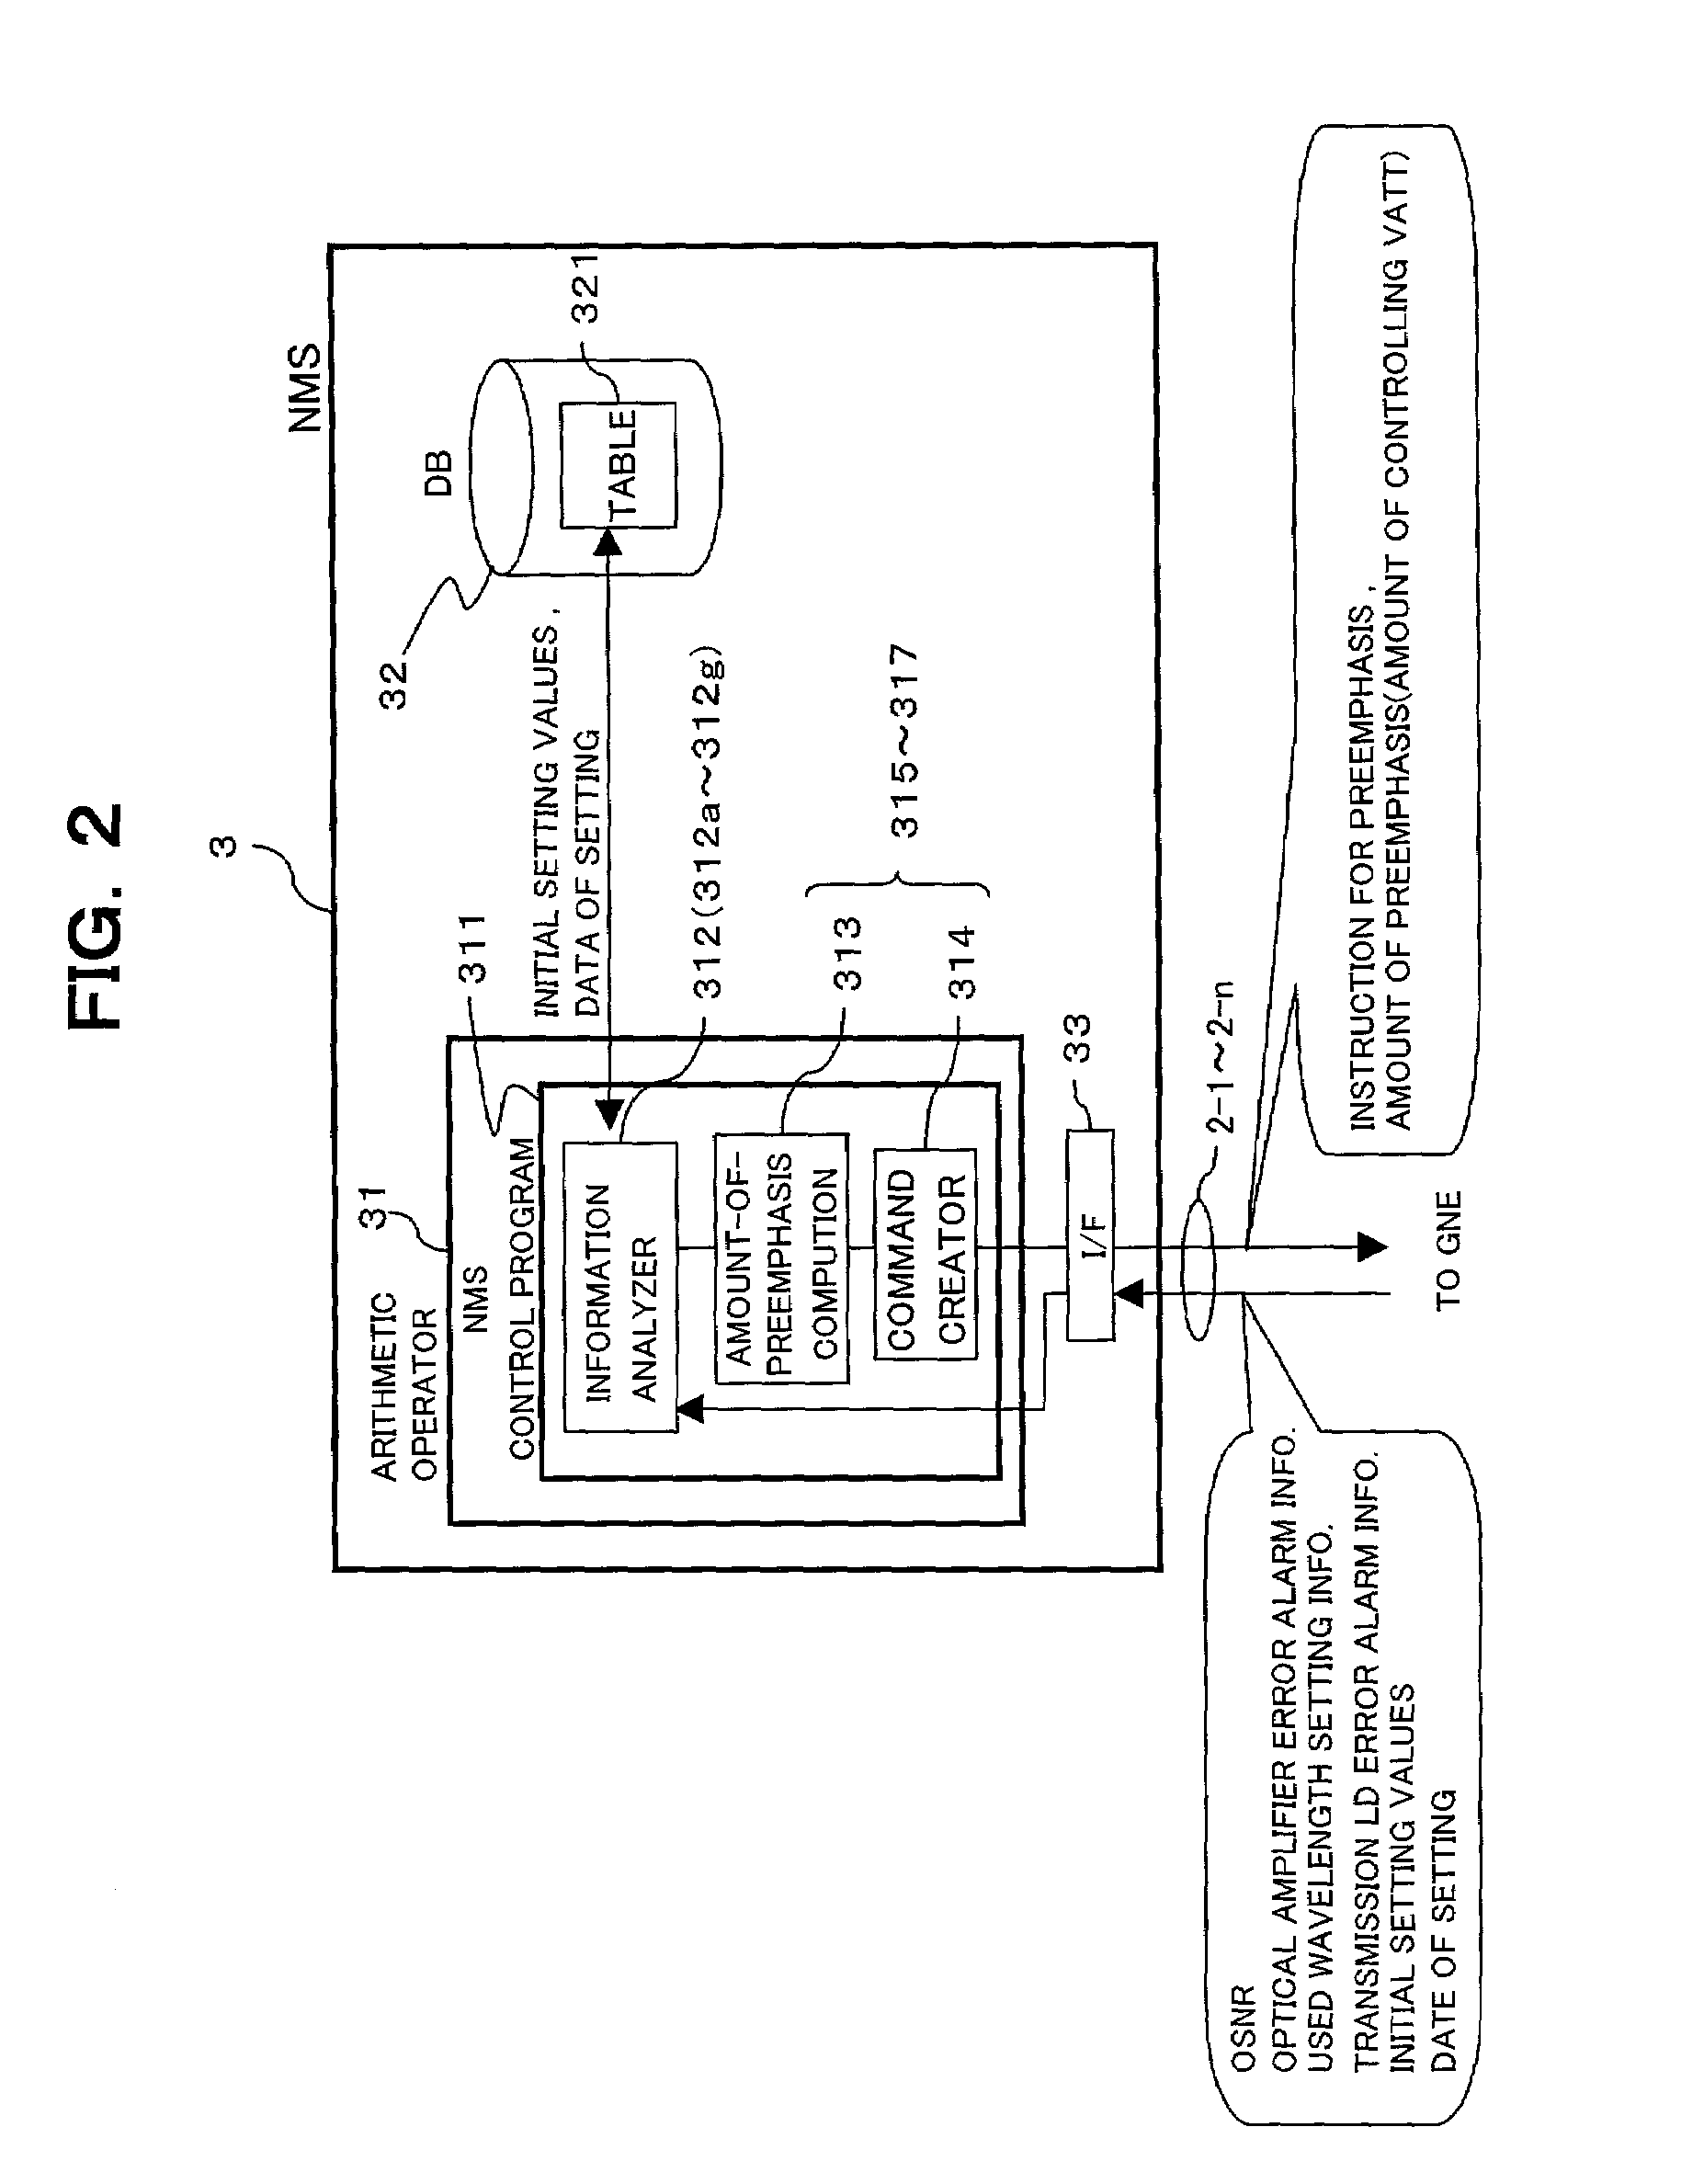 WDM transmission system, central controller for the system, and method for controlling preemphasis in the system